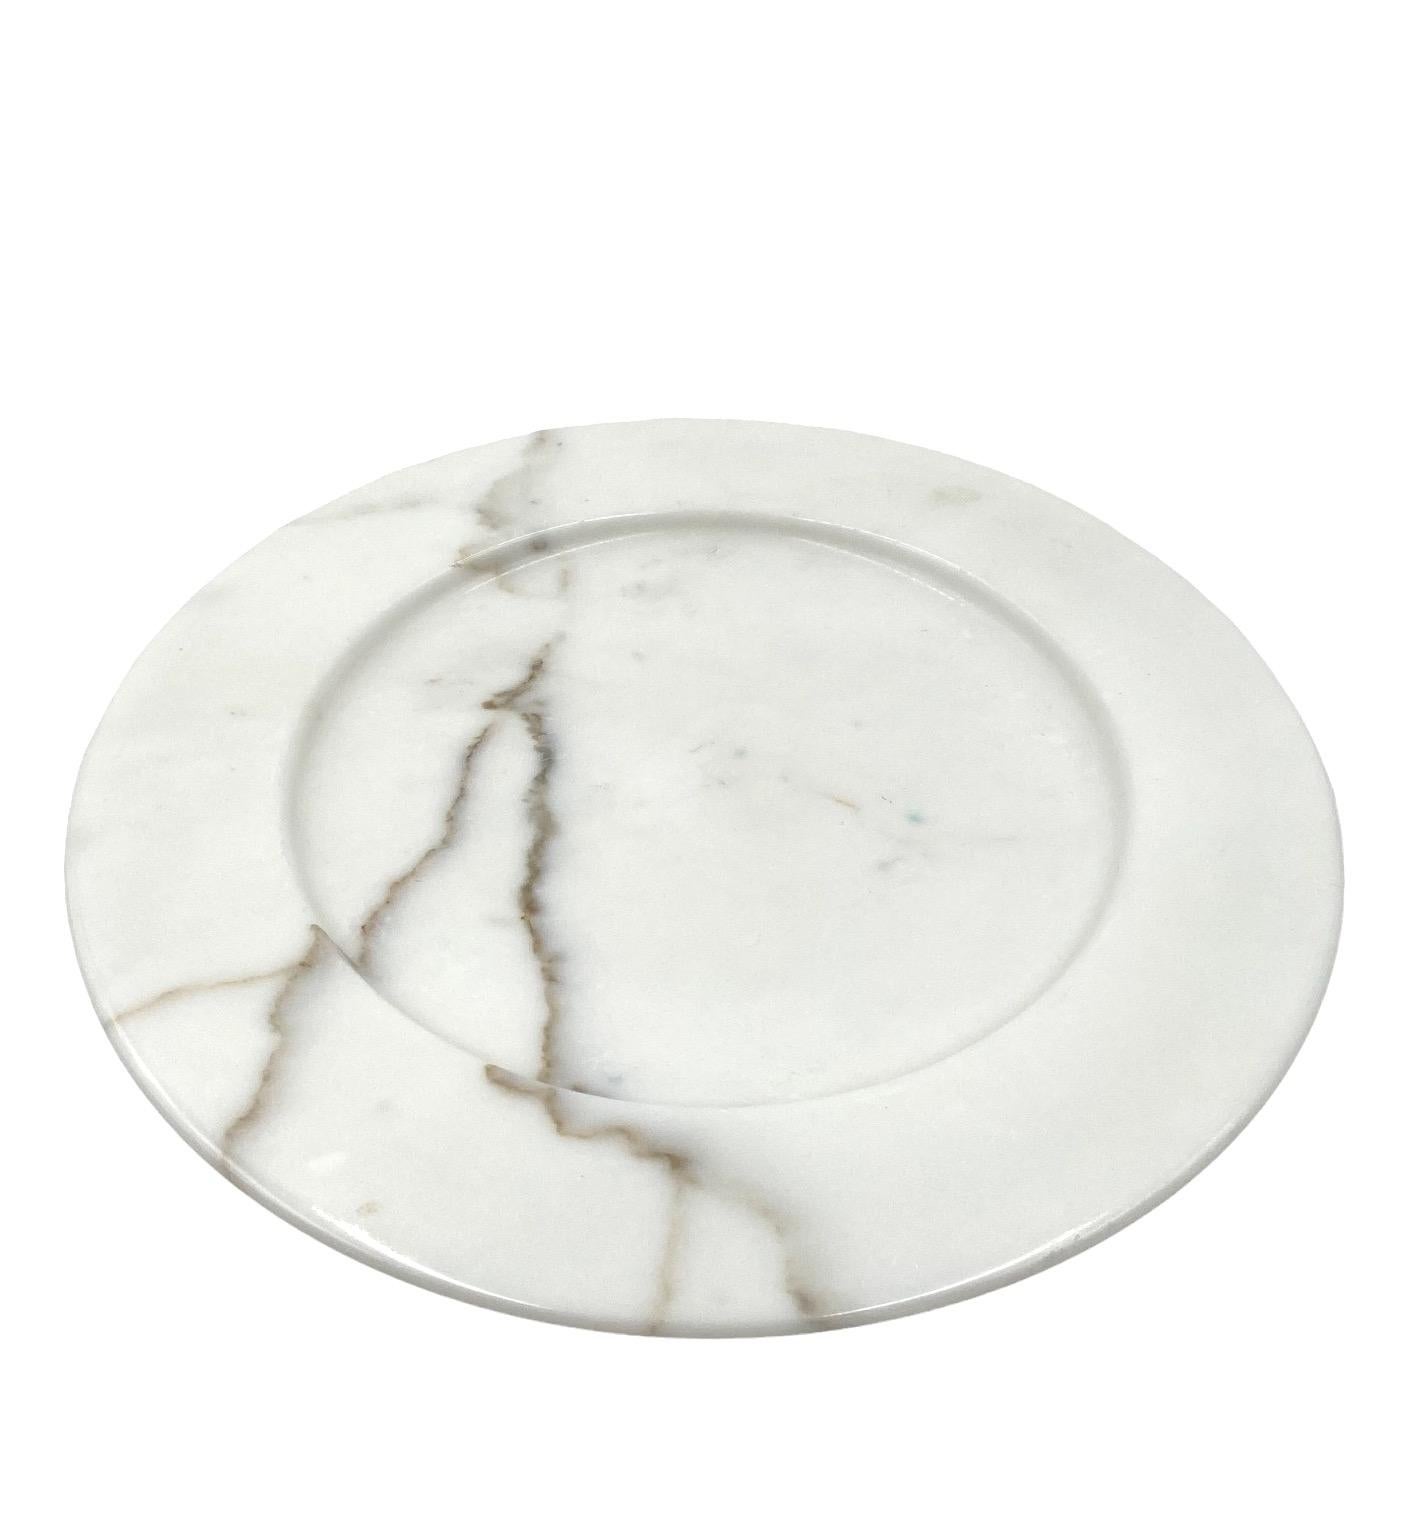 White Carrara marble centerpiece / plate, Up&Up Italy, 1970s For Sale 4